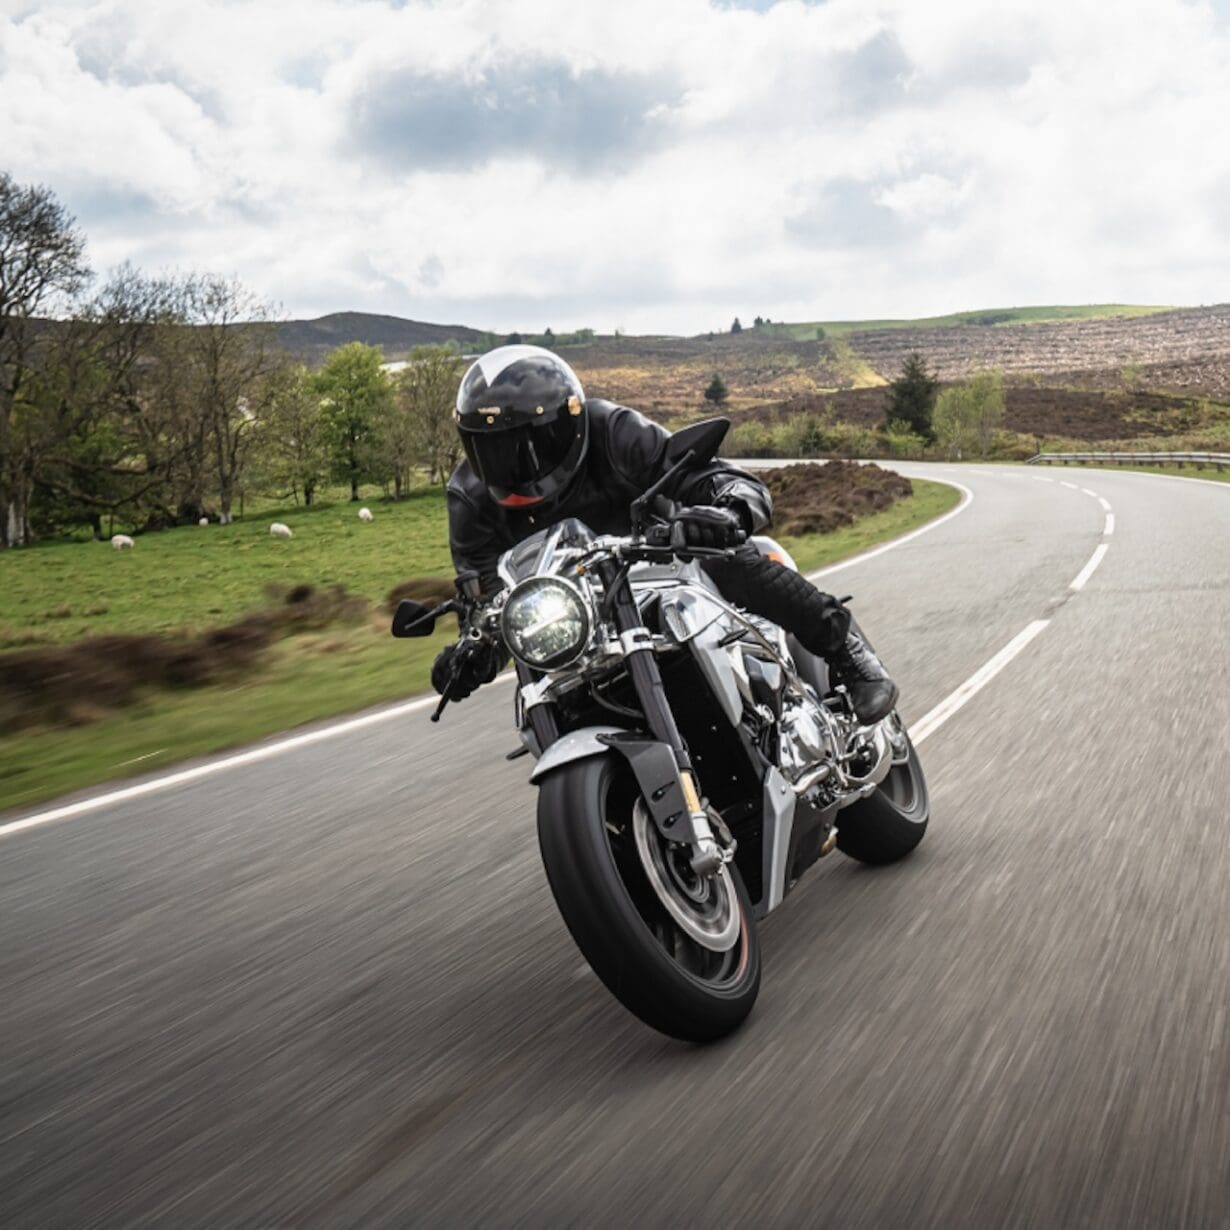 NEWS: Norton Motorcycles welcomes Revolutions as first sales partner in Scotland